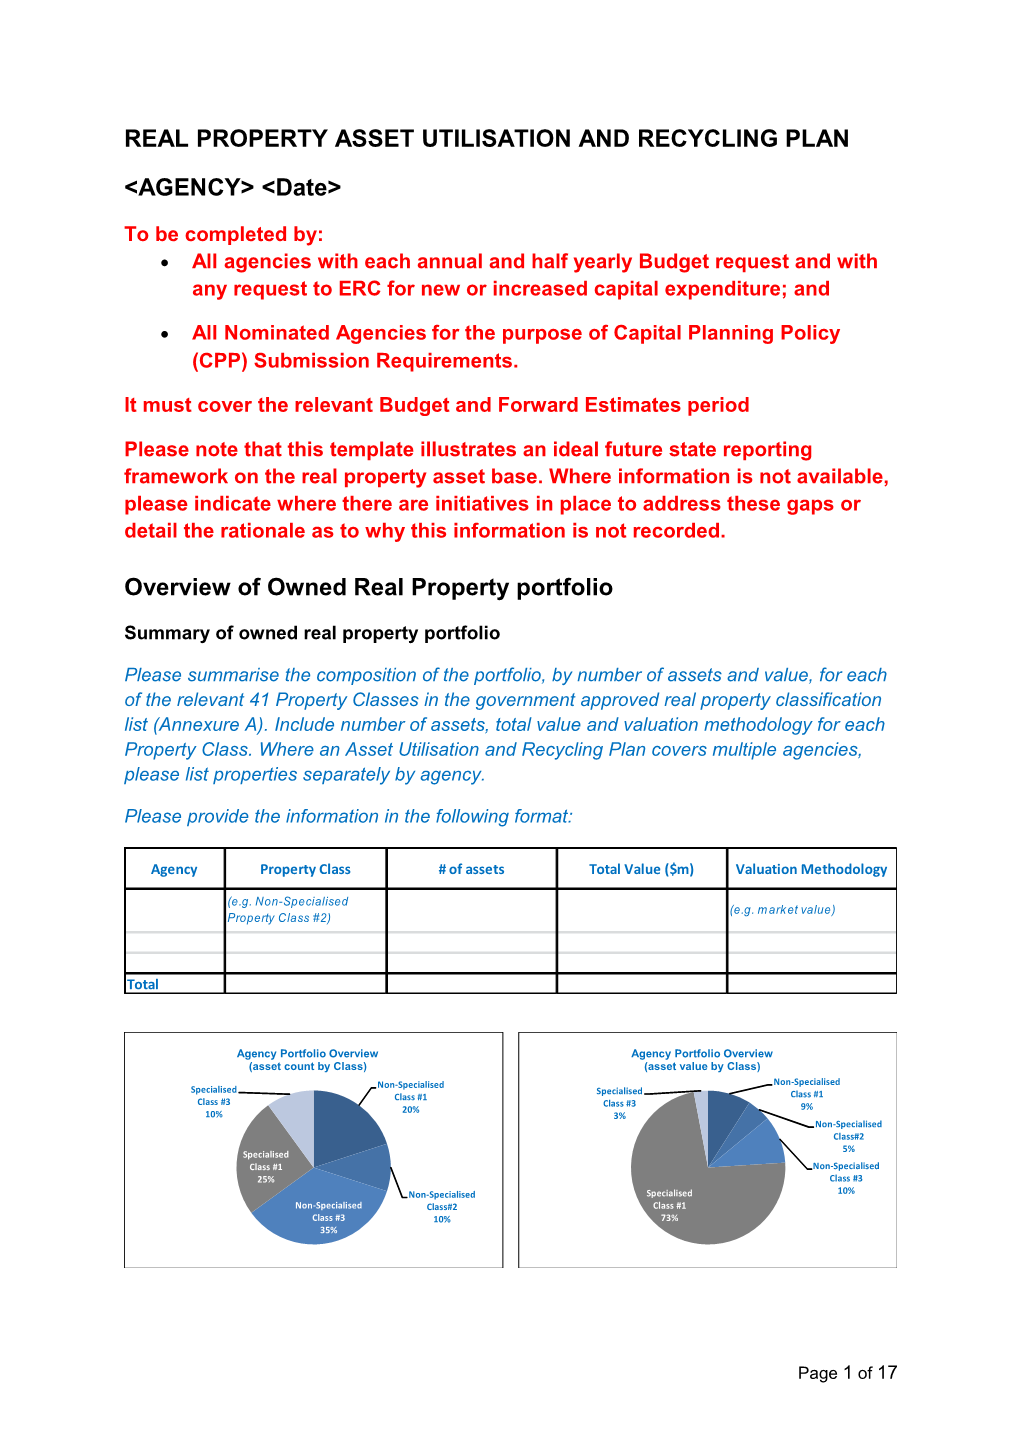 Real Property Asset Utilisation and Recycling Plan